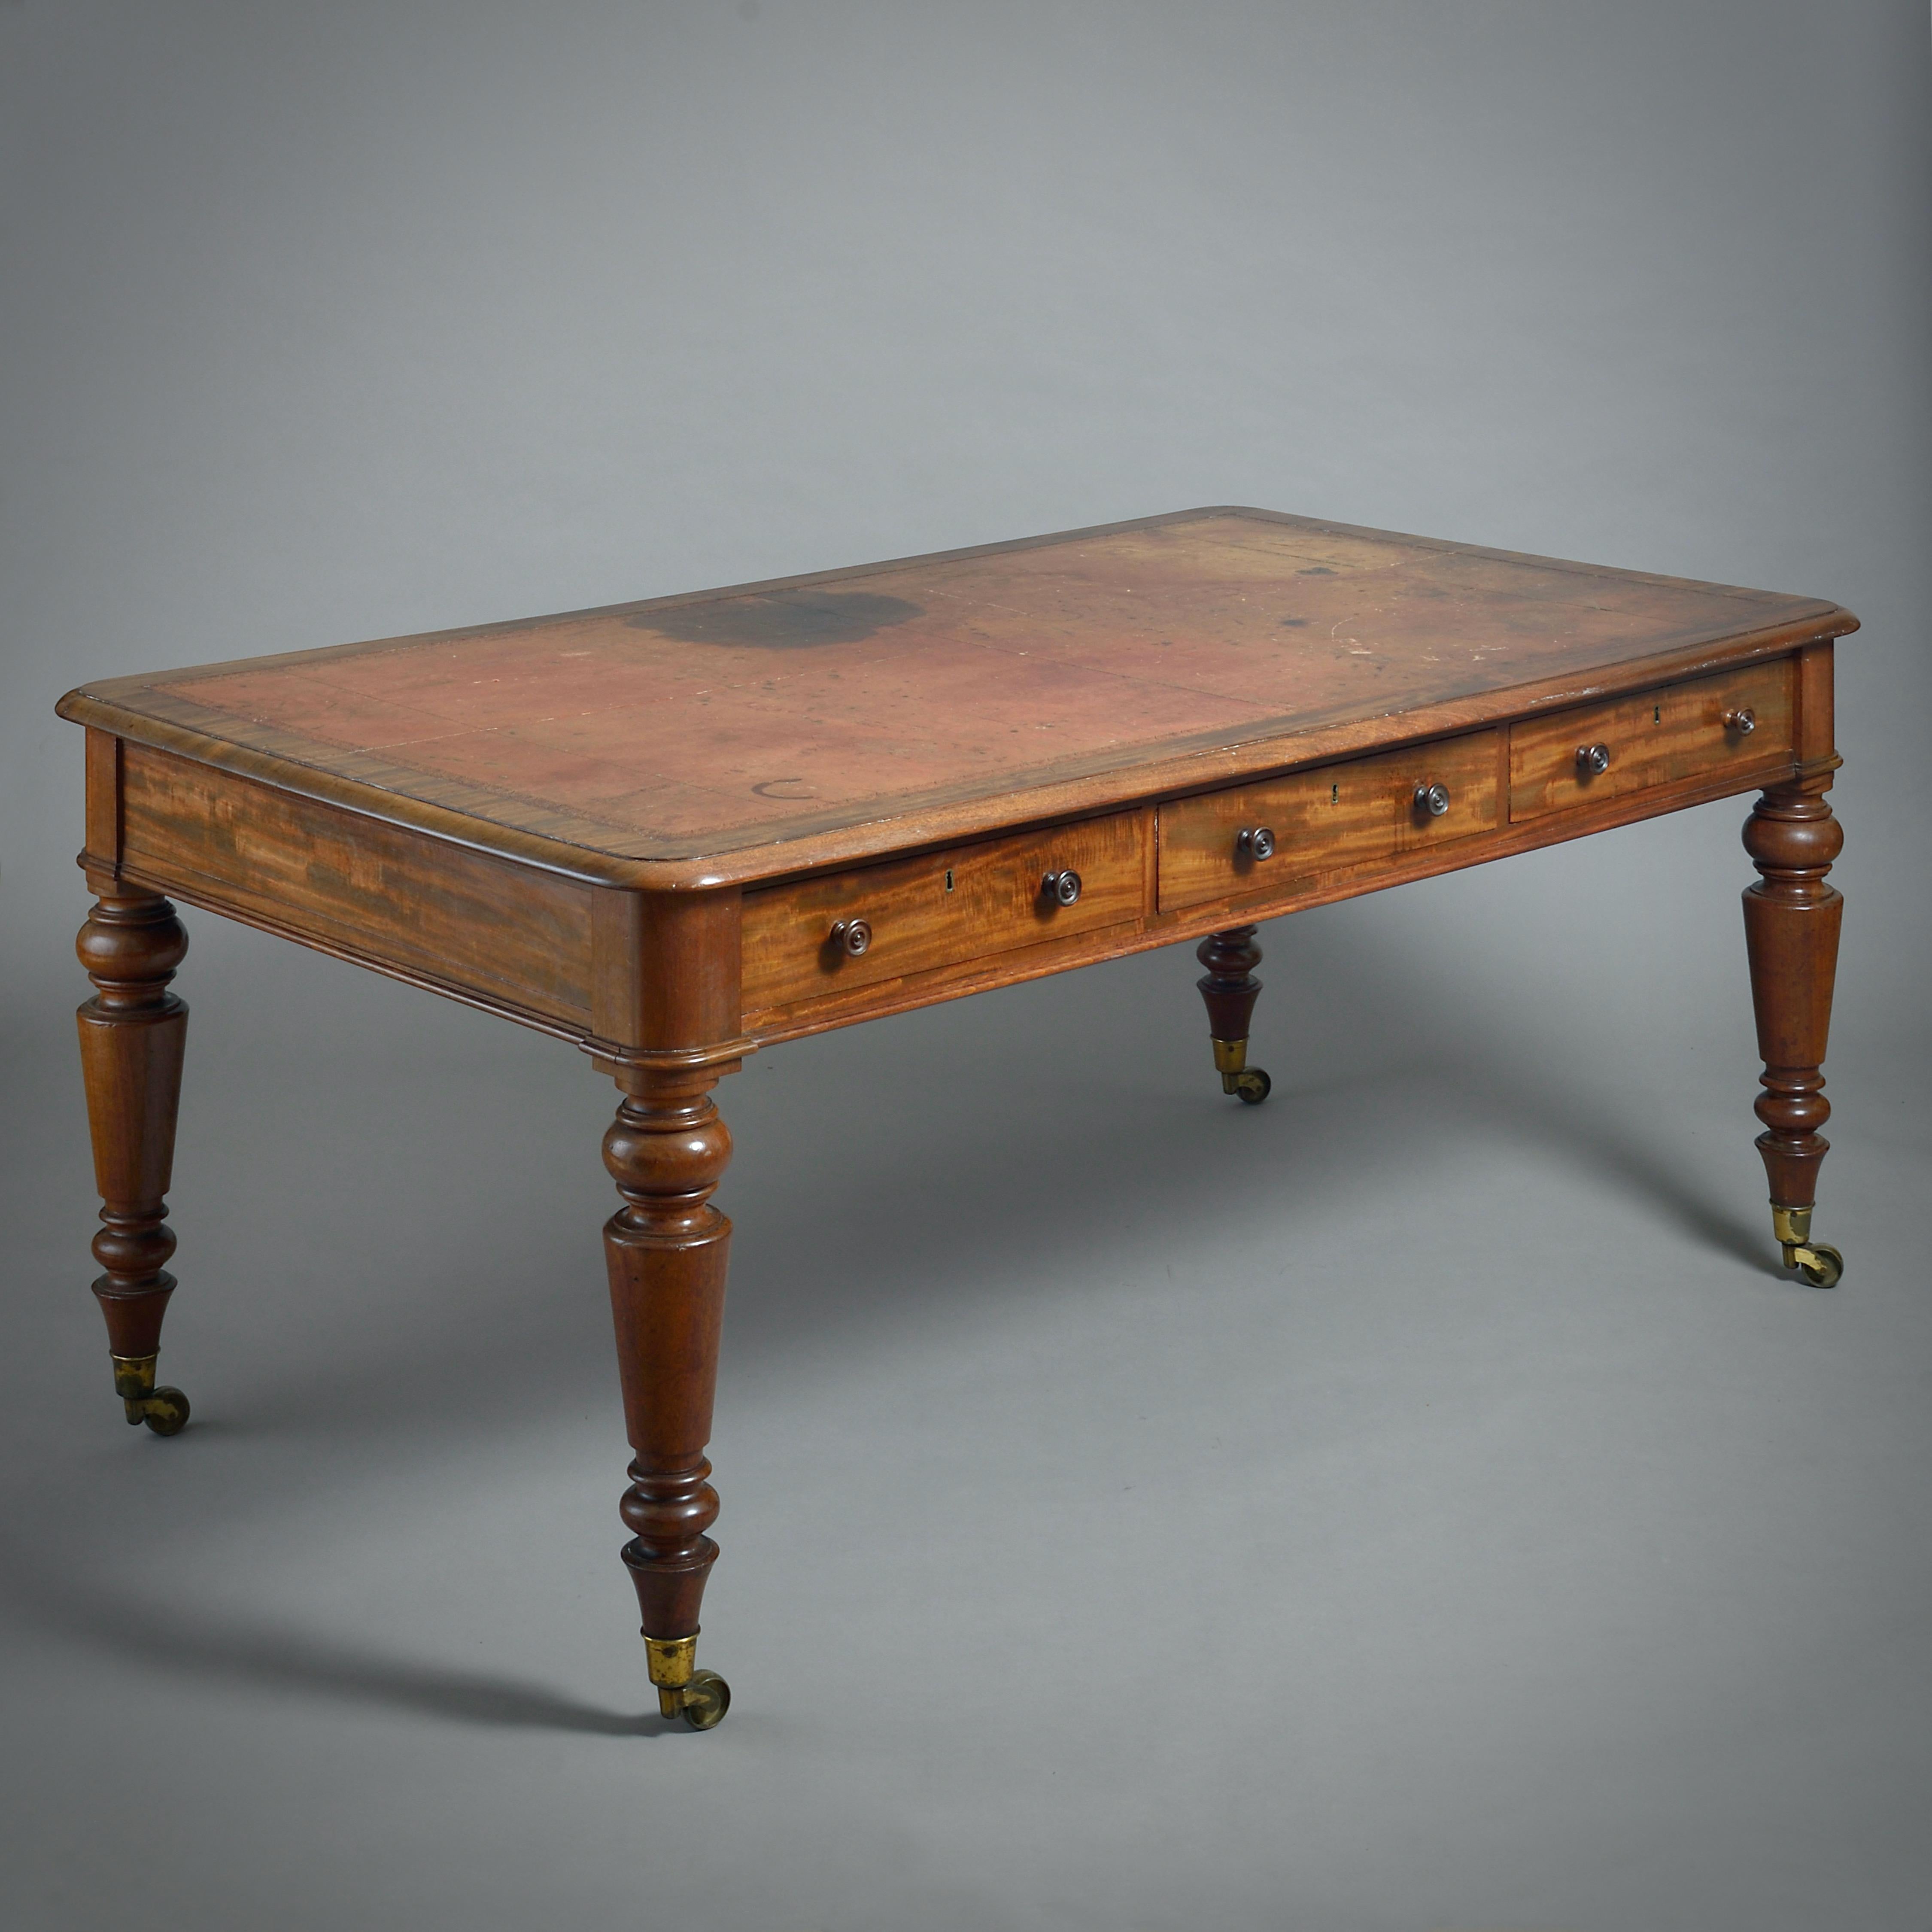 19th Century Regency Mahogany Library Table Attributed to Gillows For Sale